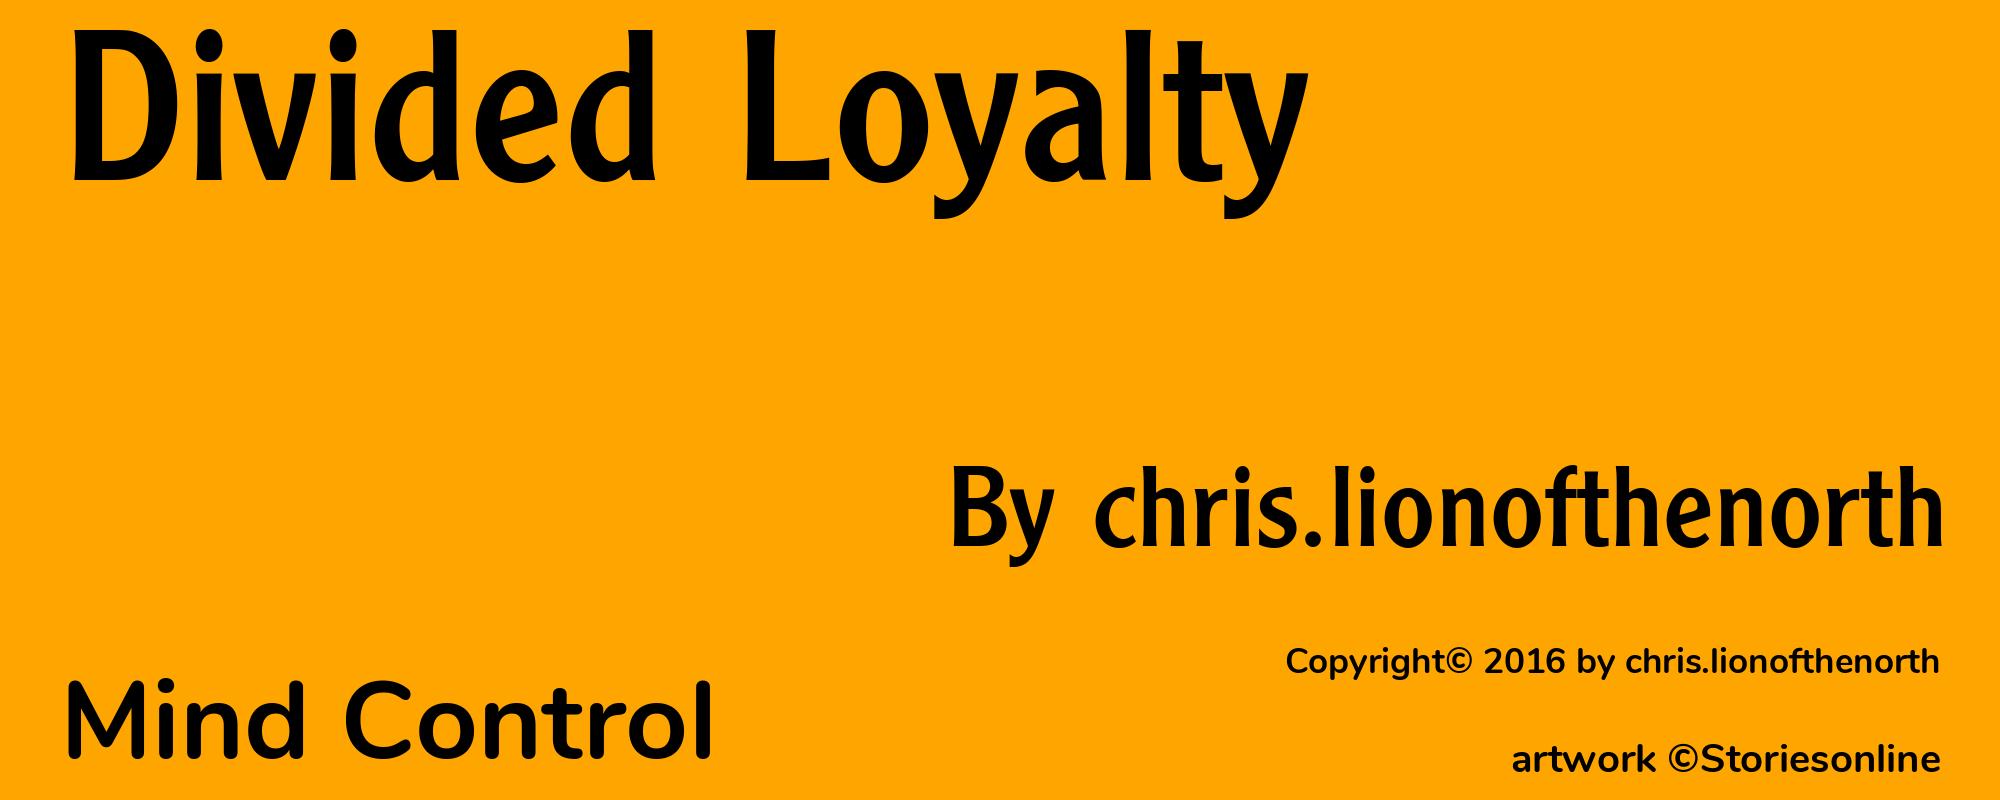 Divided Loyalty - Cover